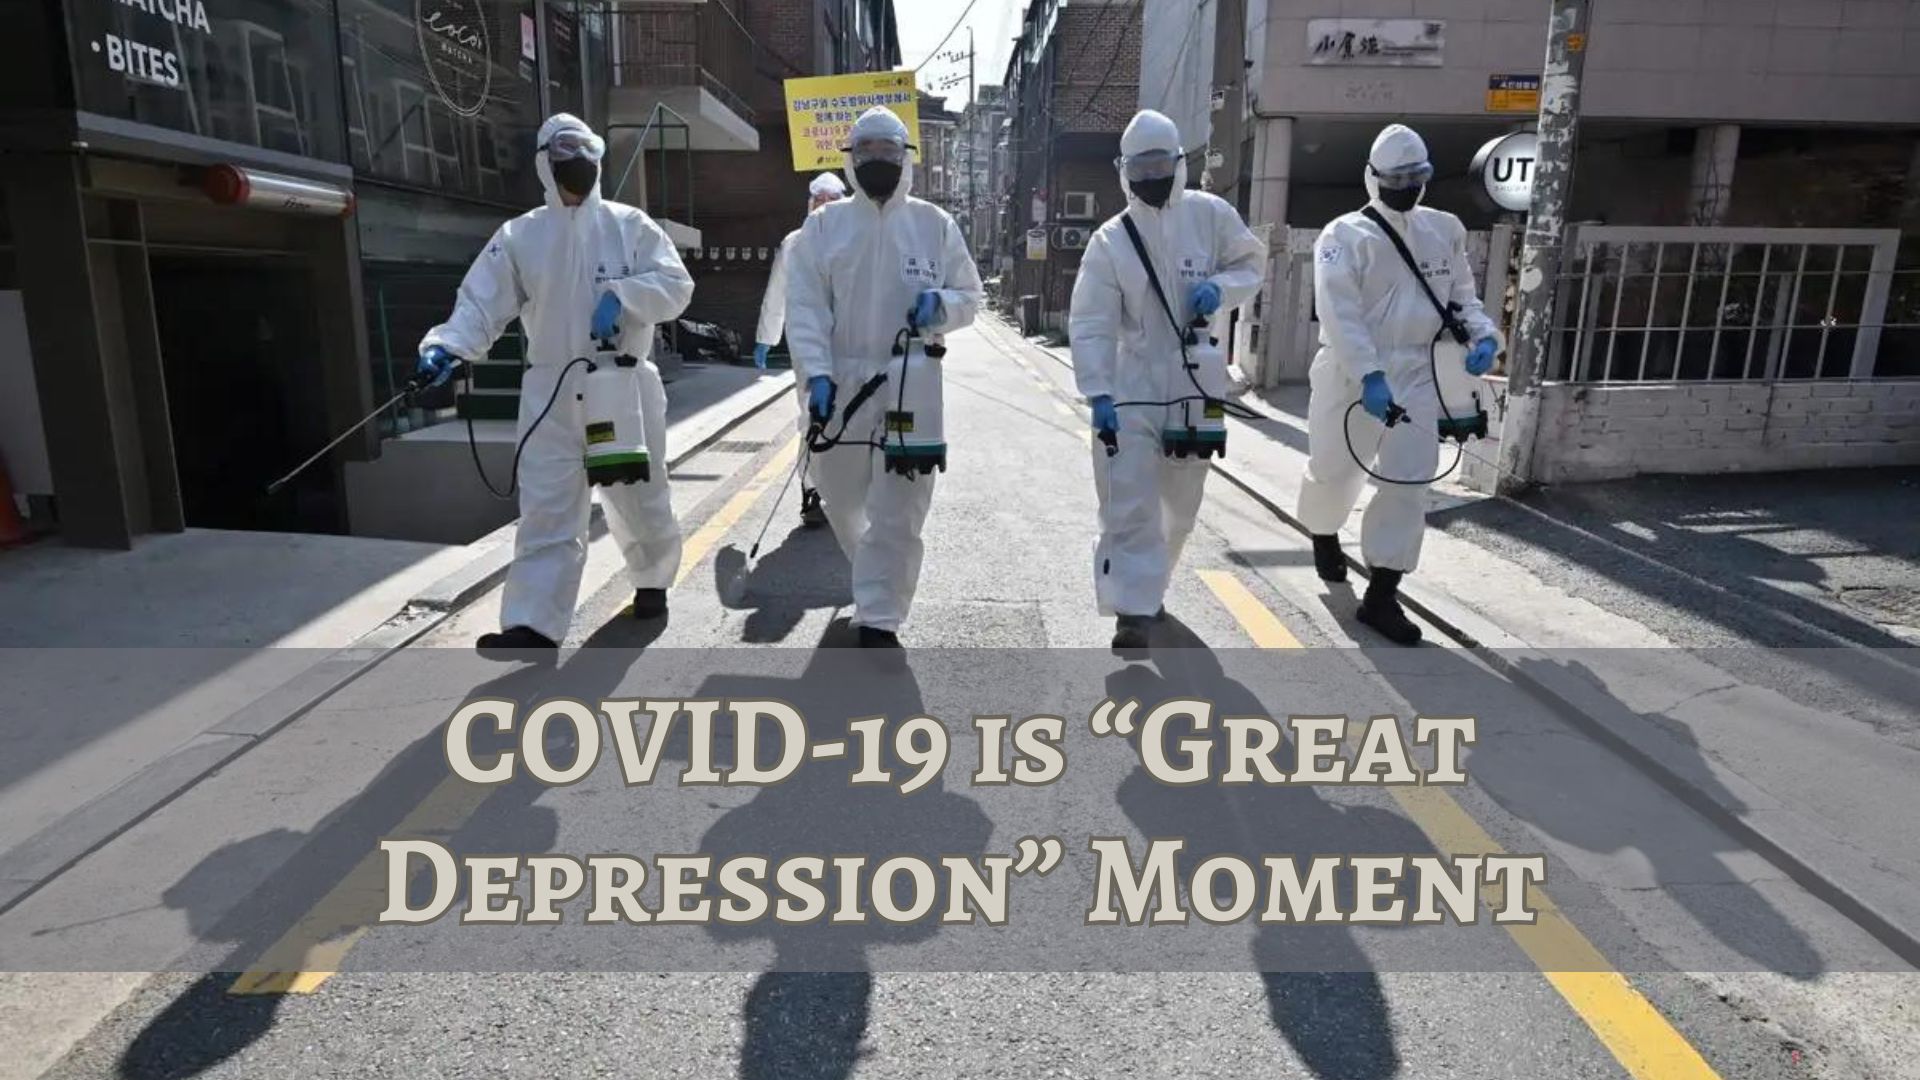 COVID-19 is Our Generation’s “Great Depression” Moment